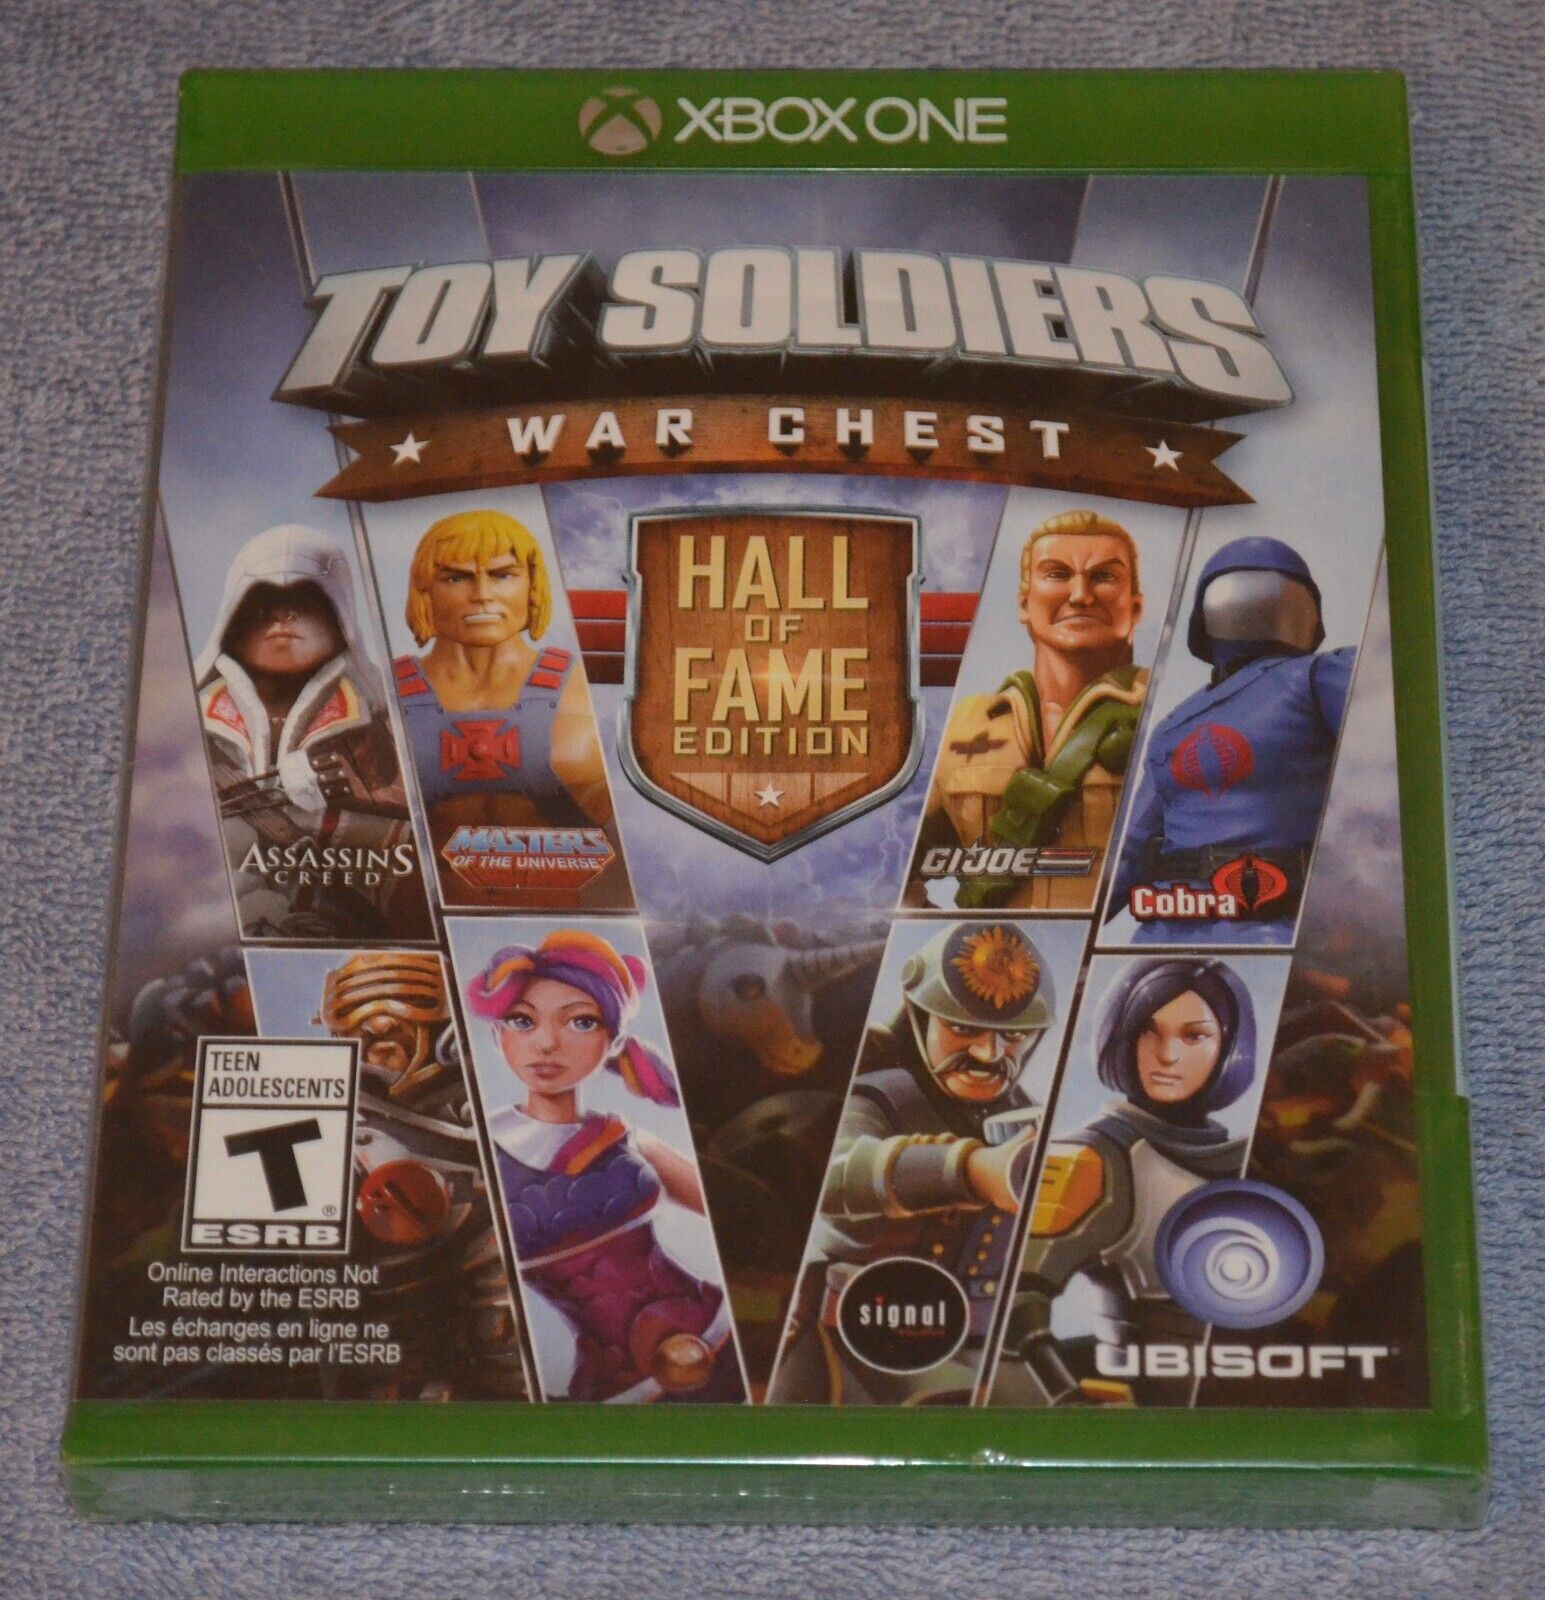 New XBOX ONE Toy Soldiers War Chest Hall of Fame Edition Sealed Video Game